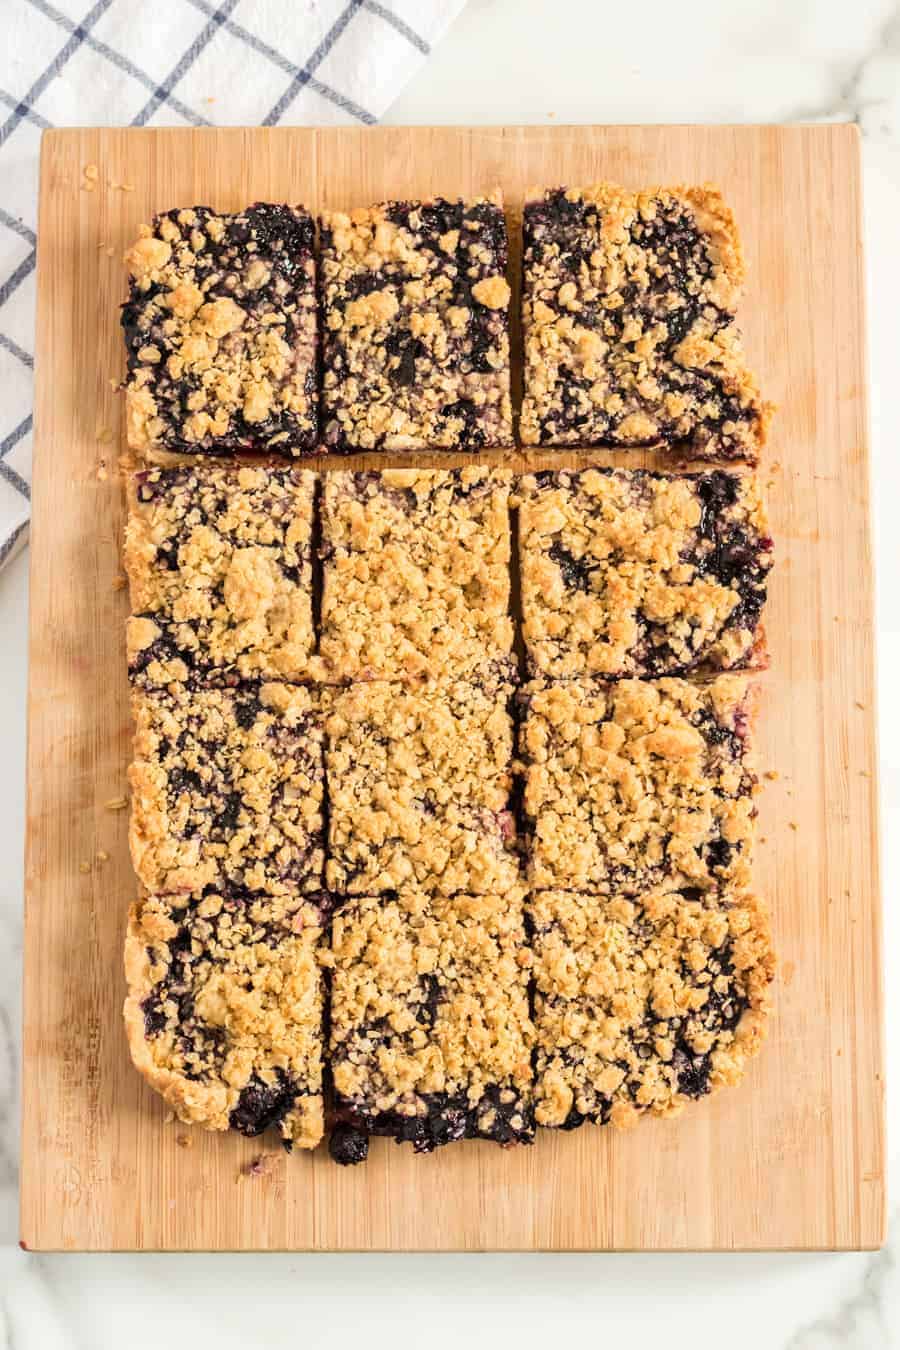 These streusel-topped Blueberry Pie Bars have a dense crust and gooey, blueberry-packed filling to make them a perfect dessert (or breakfast) any day.